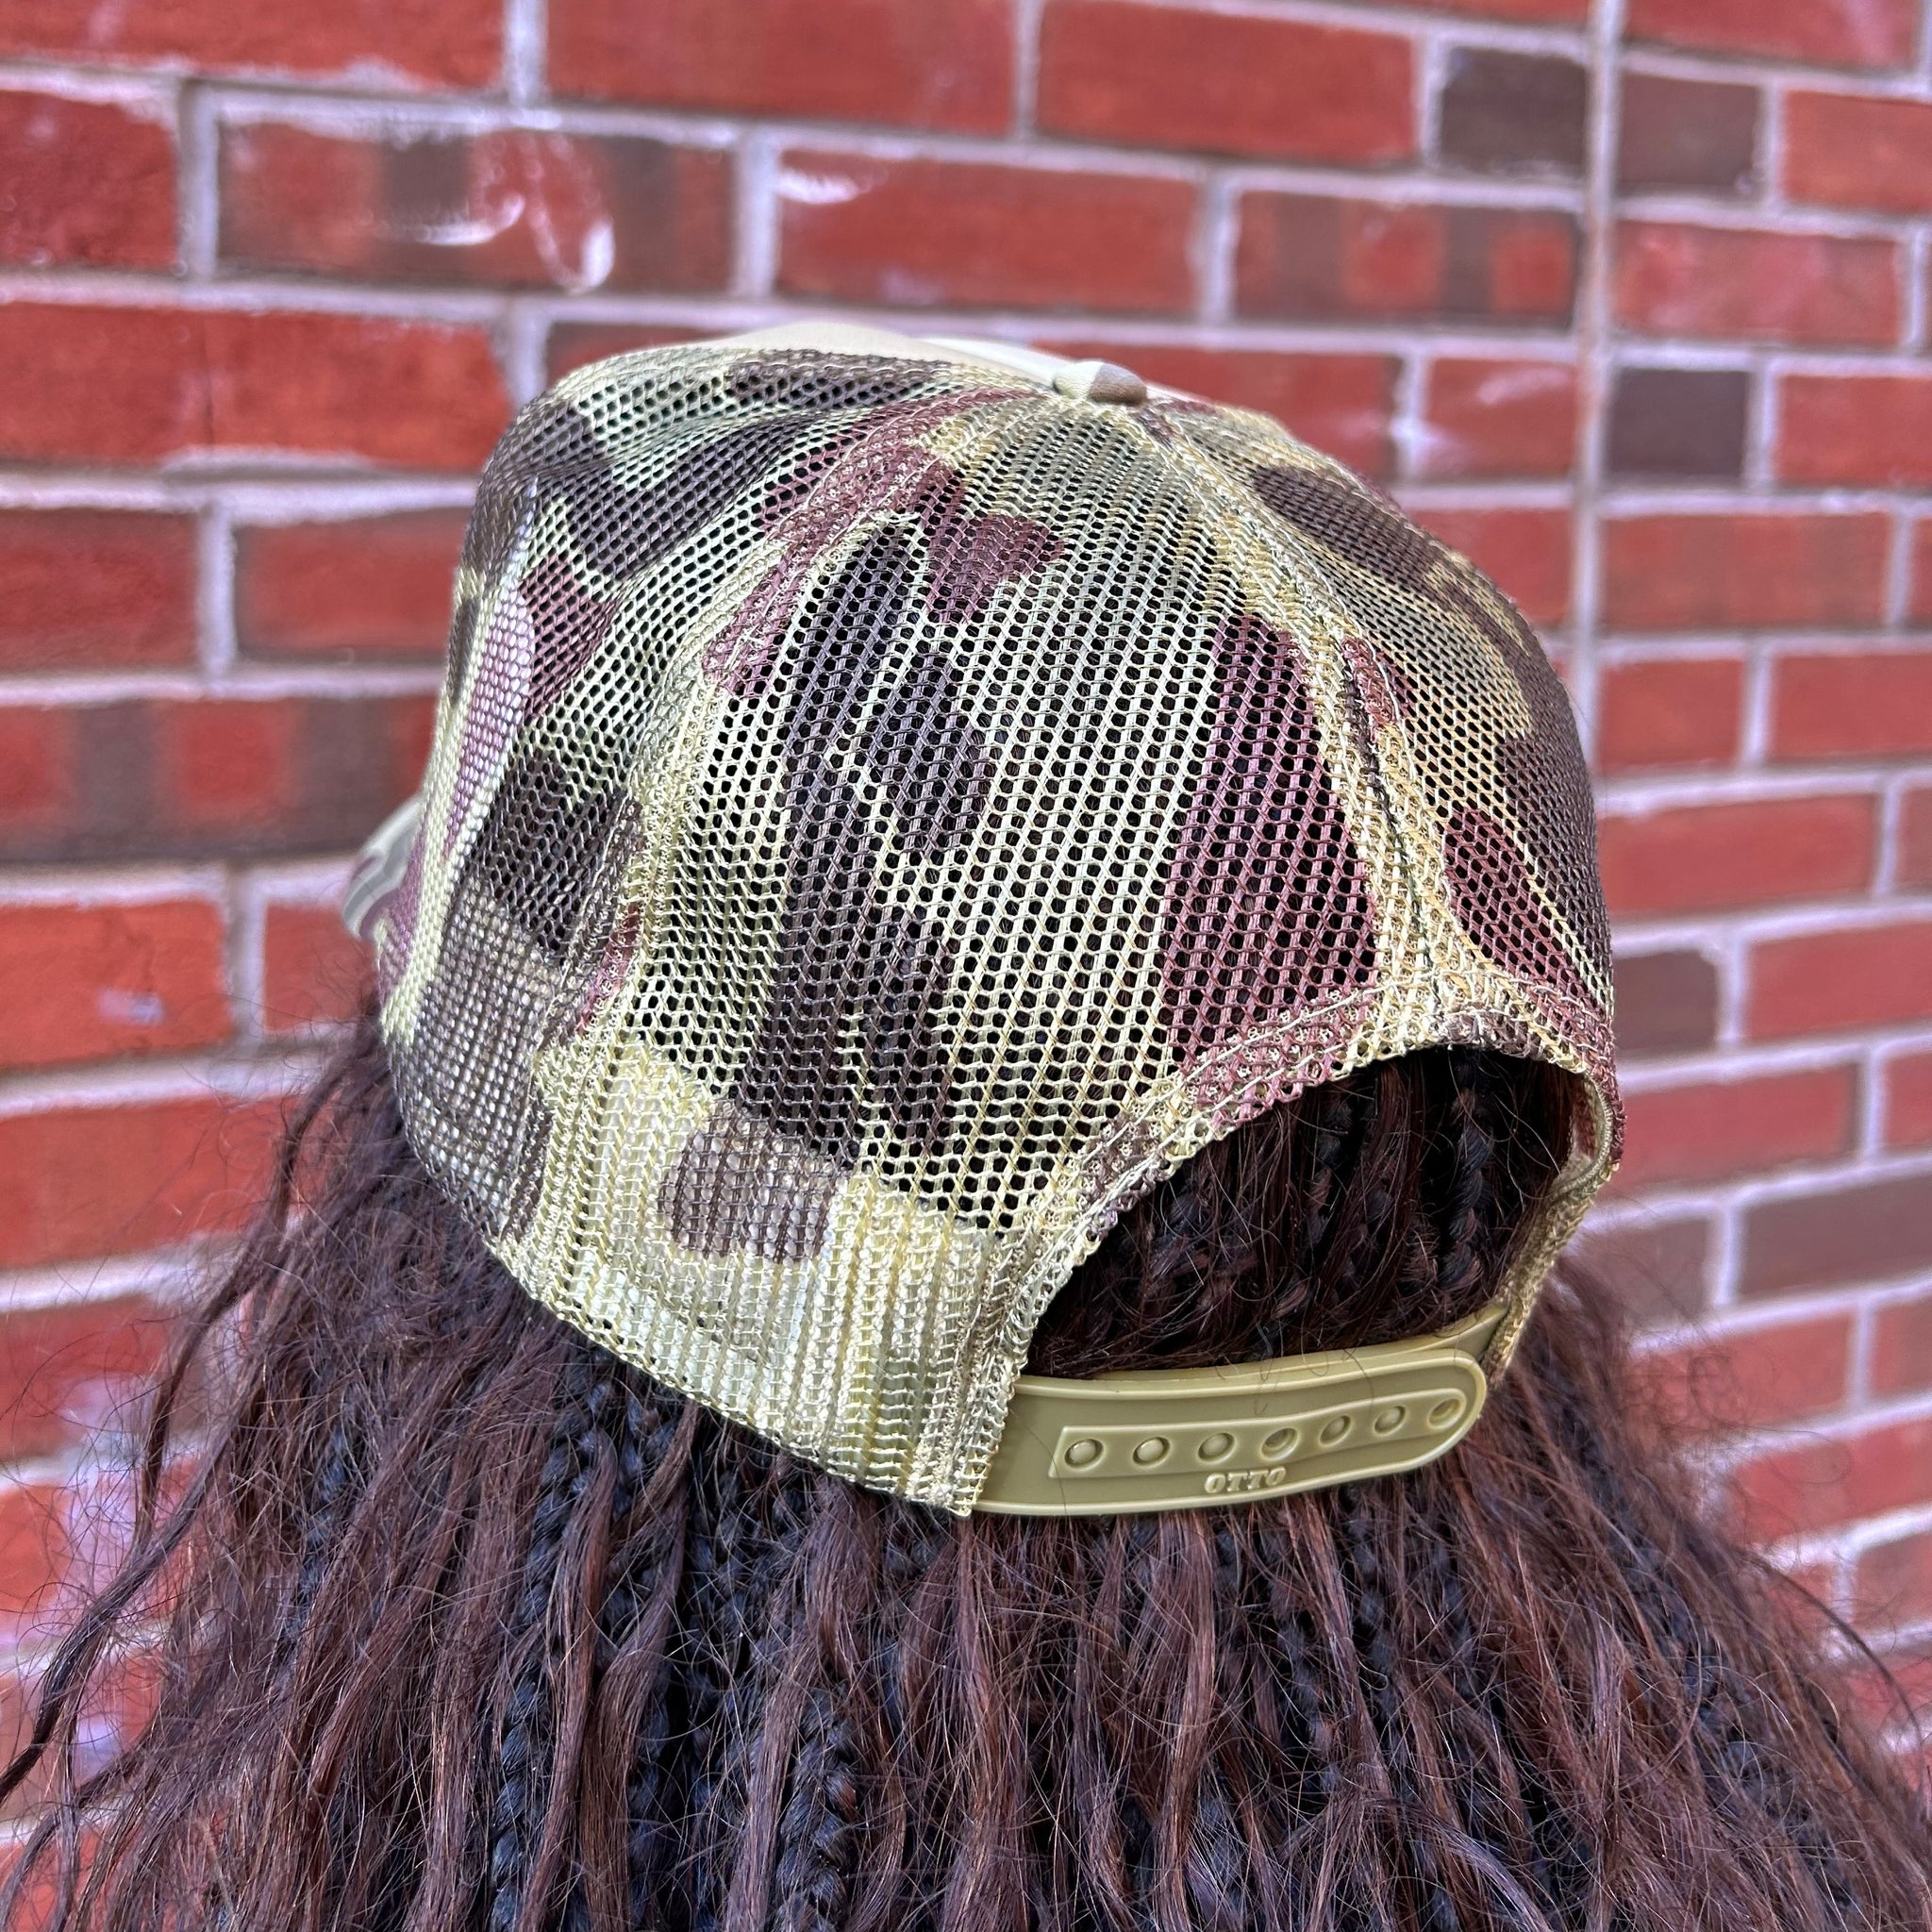 Sweet Chick Records Trucker Hat - Olive Camo